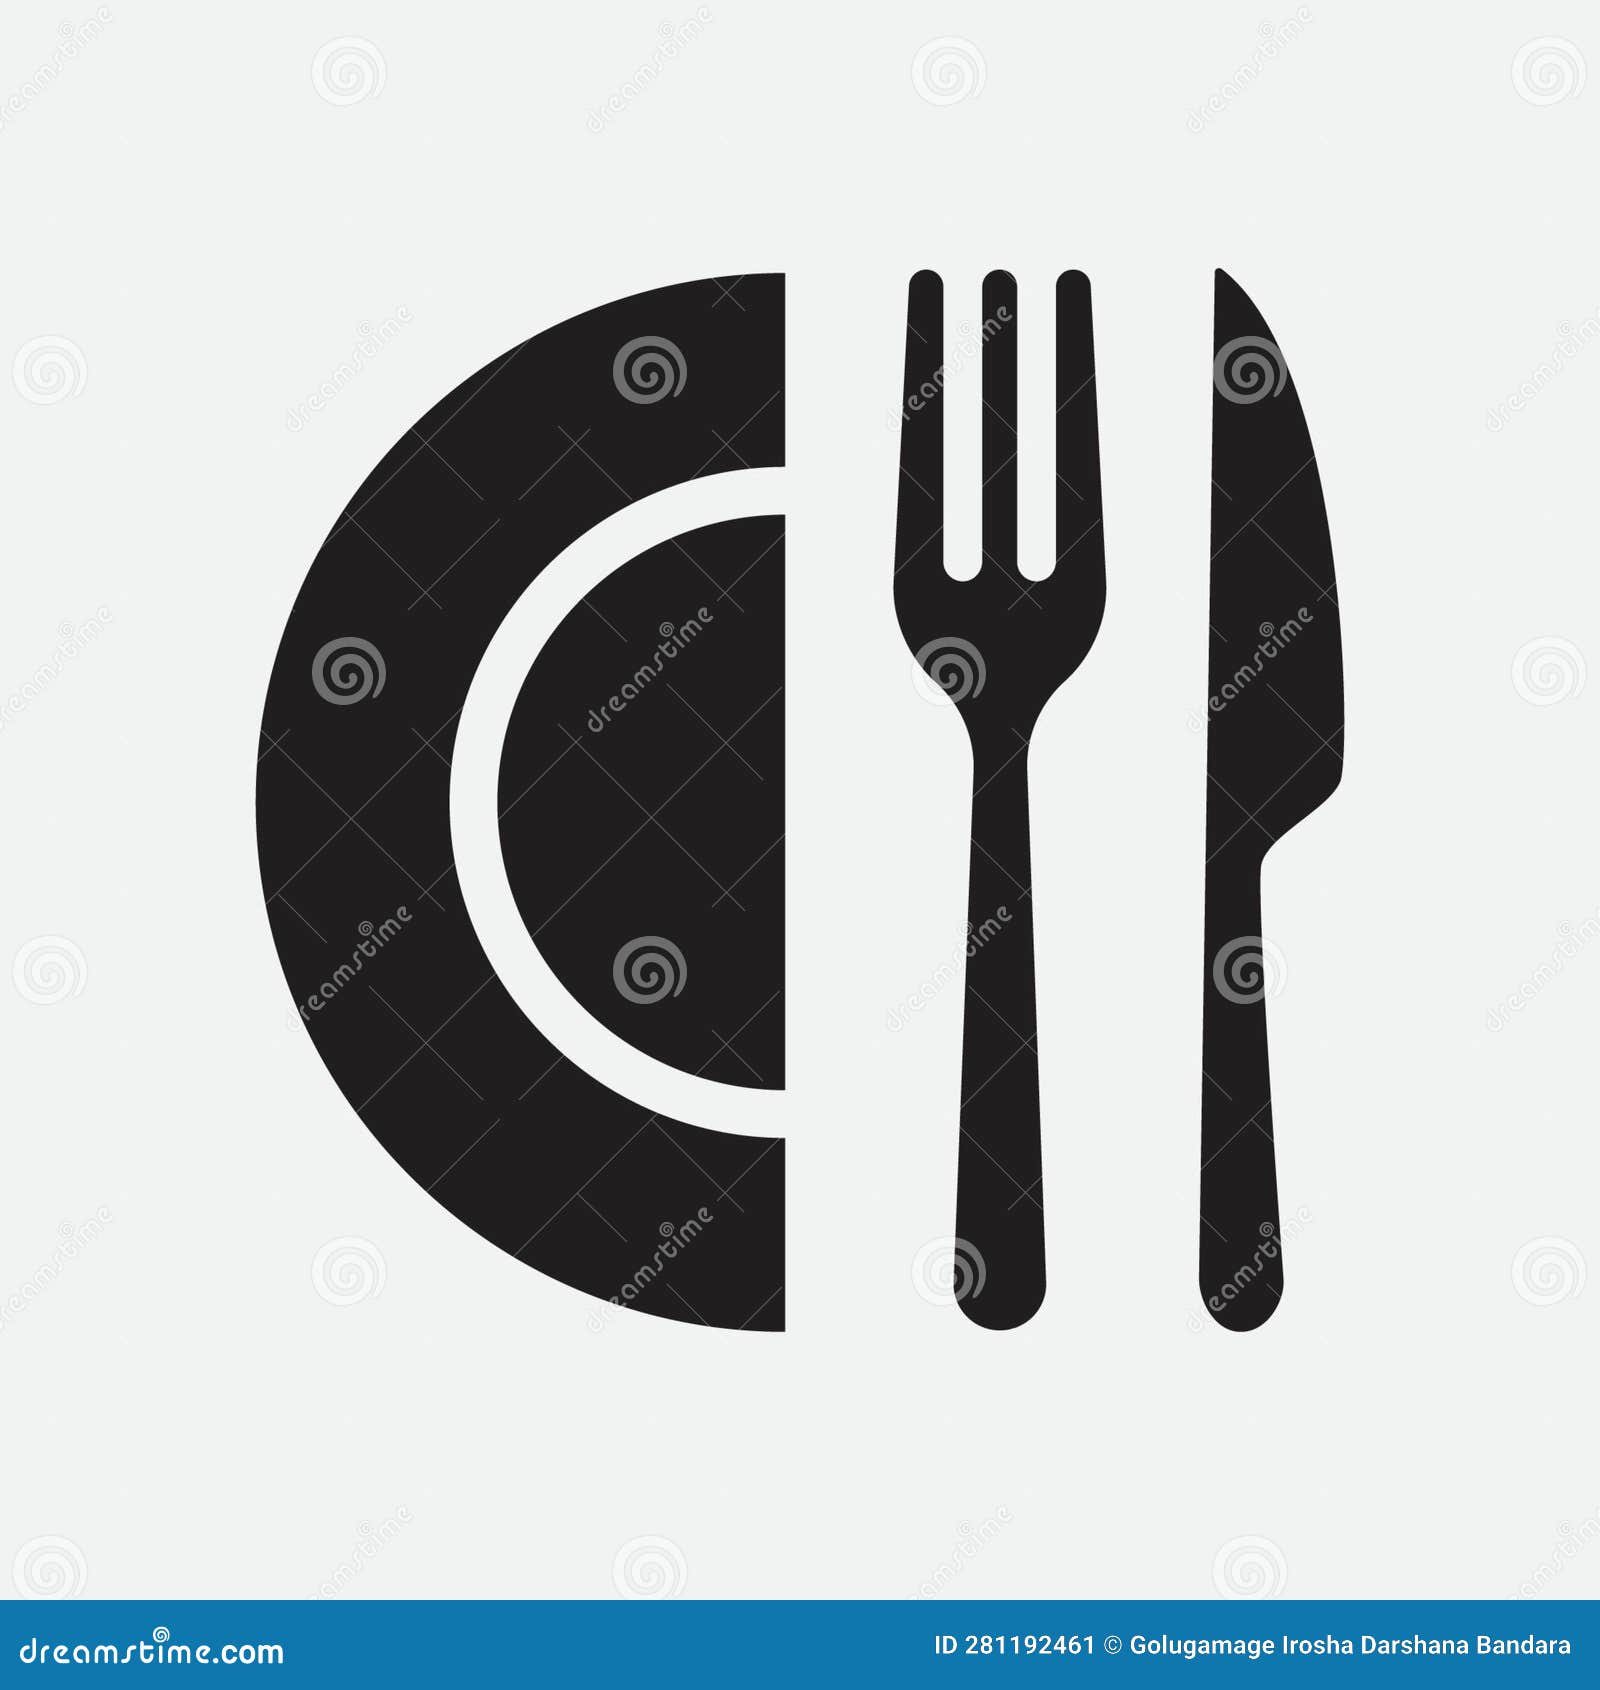 Restaurant silverware on a white background Vector Image